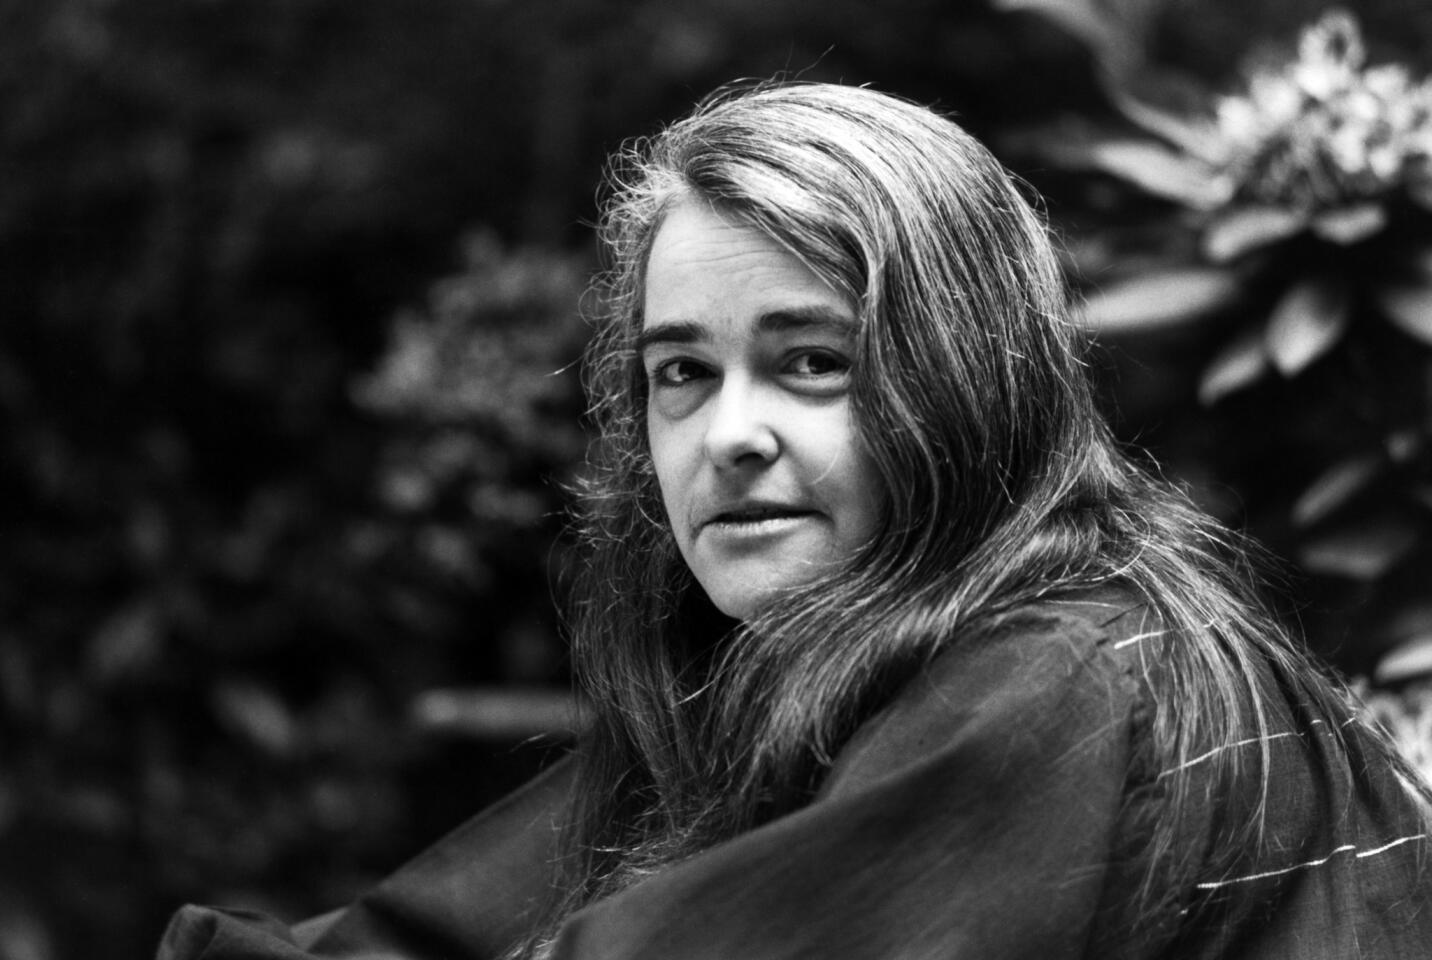 American feminist, writer and activist Kate Millett has died at the age of 82. She suffered a heart attack while on a visit to Paris on Sept. 6, 2017. Her best-selling "Sexual Politics" was a landmark of cultural criticism and a manifesto for the modern feminist movement. Read more.